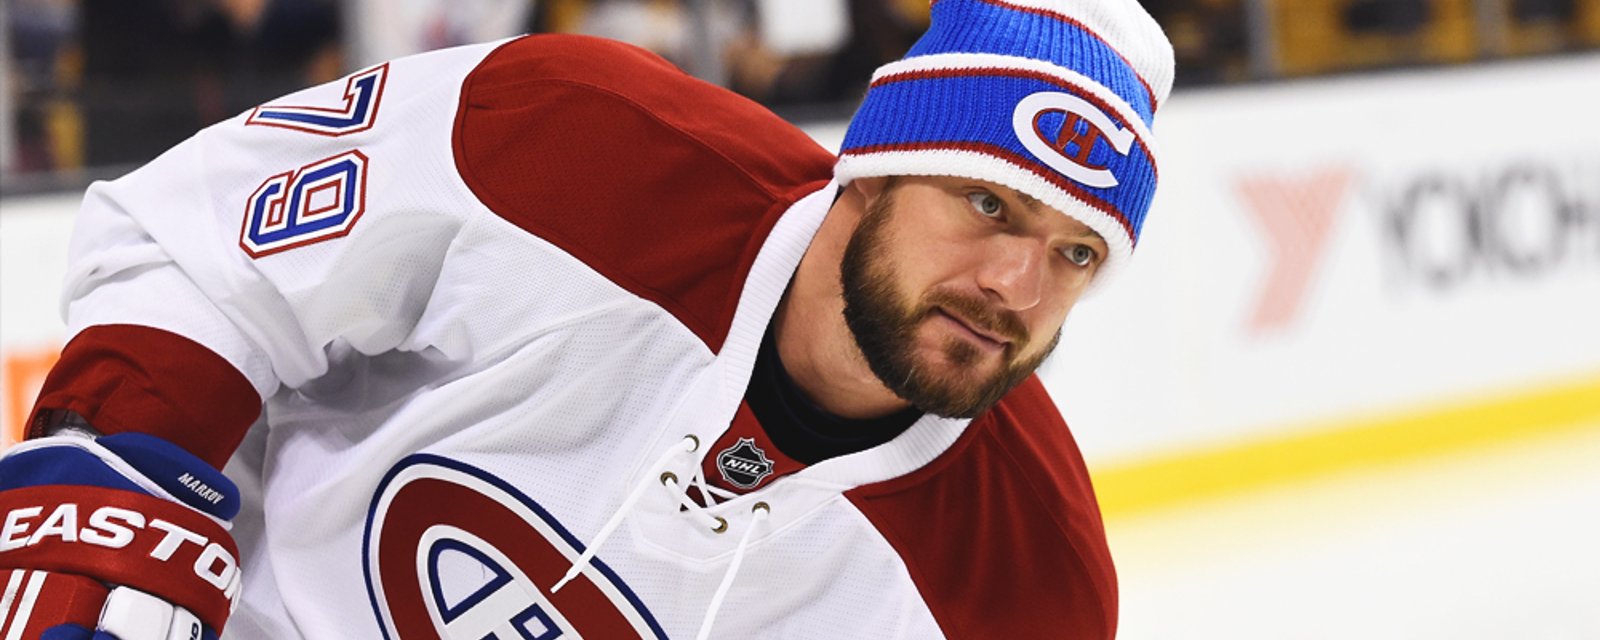 Report: Markov's former agent gives major update on his situation.